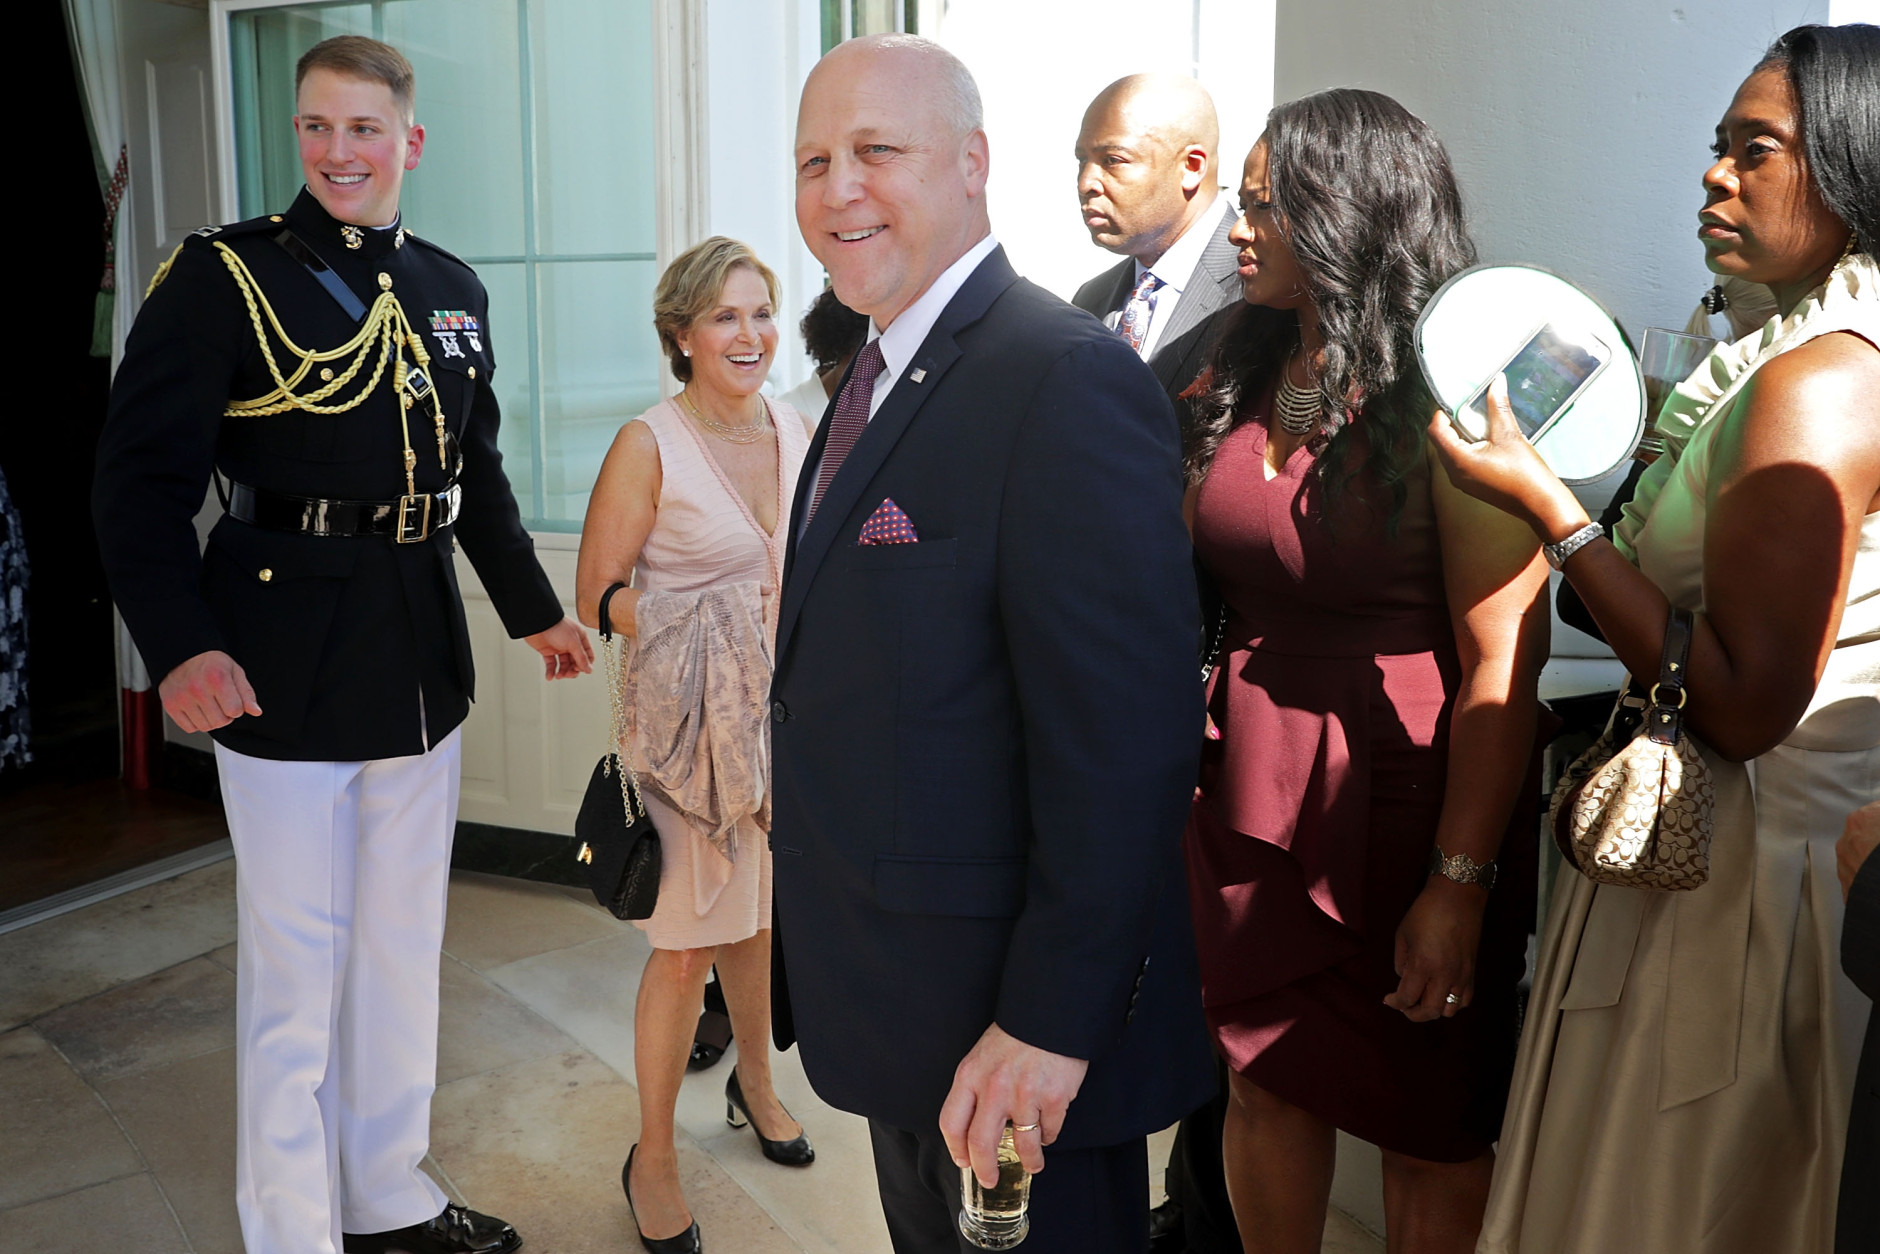 WASHINGTON, DC - SEPTEMBER 23:  New Orleans Mayor Mitch Landrieu walks back into the Green Room during a reception in honor of the opening of the Smithsonian National Museum of African American History and Culture on the South Lawn of the White House September 23, 2016 in Washington, DC. Presidents Barack Obama and George W. Bush will be among the guests to help open the museum to the public Saturday.  (Photo by Chip Somodevilla/Getty Images)